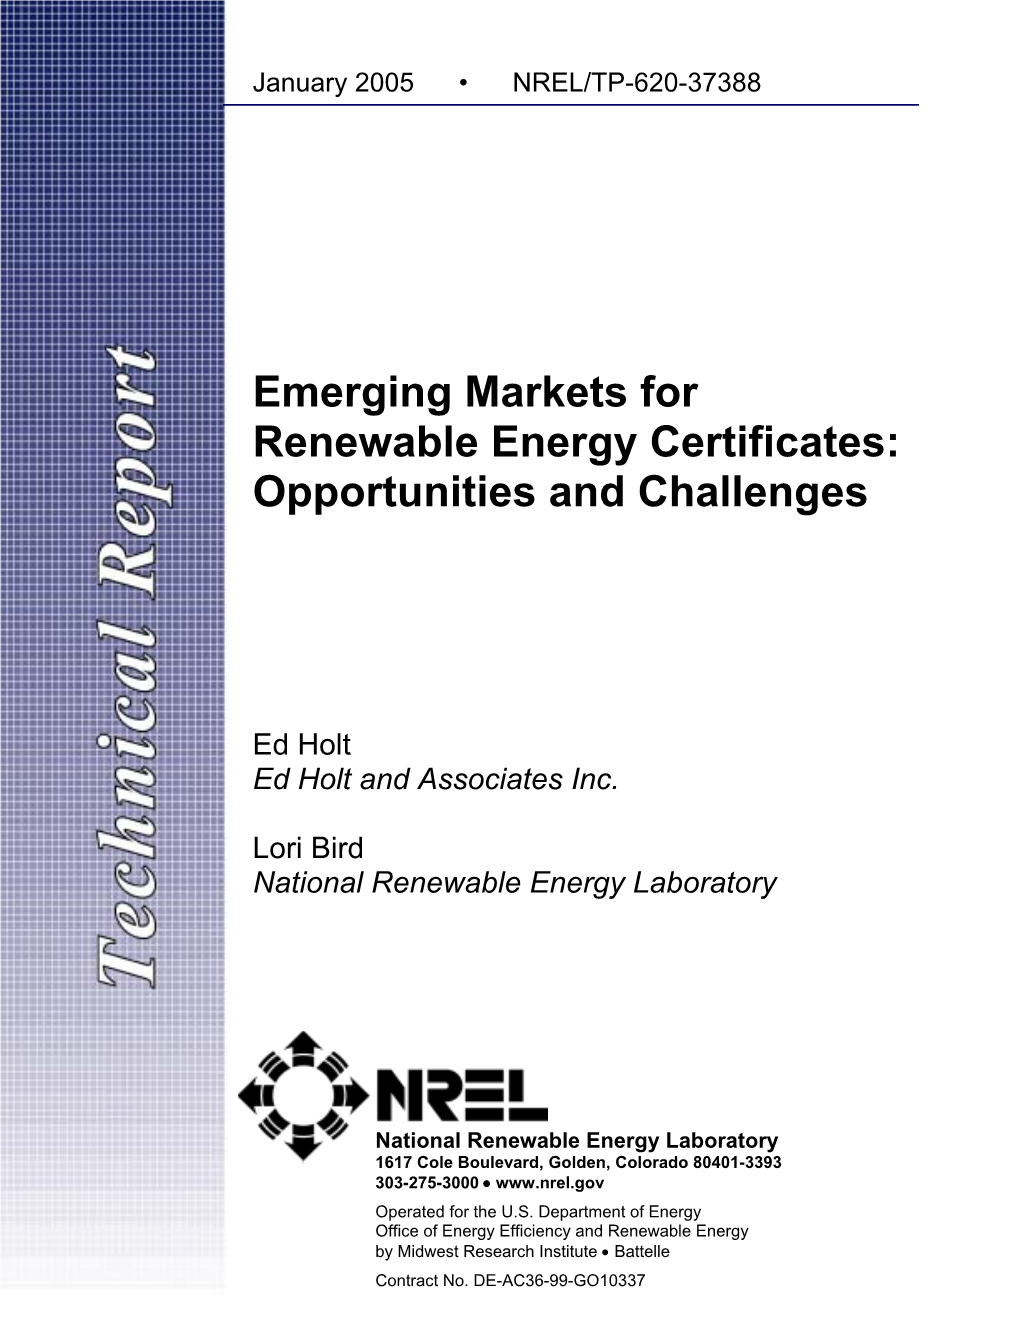 Emerging Markets for Renewable Energy Certificates: Opportunities and Challenges